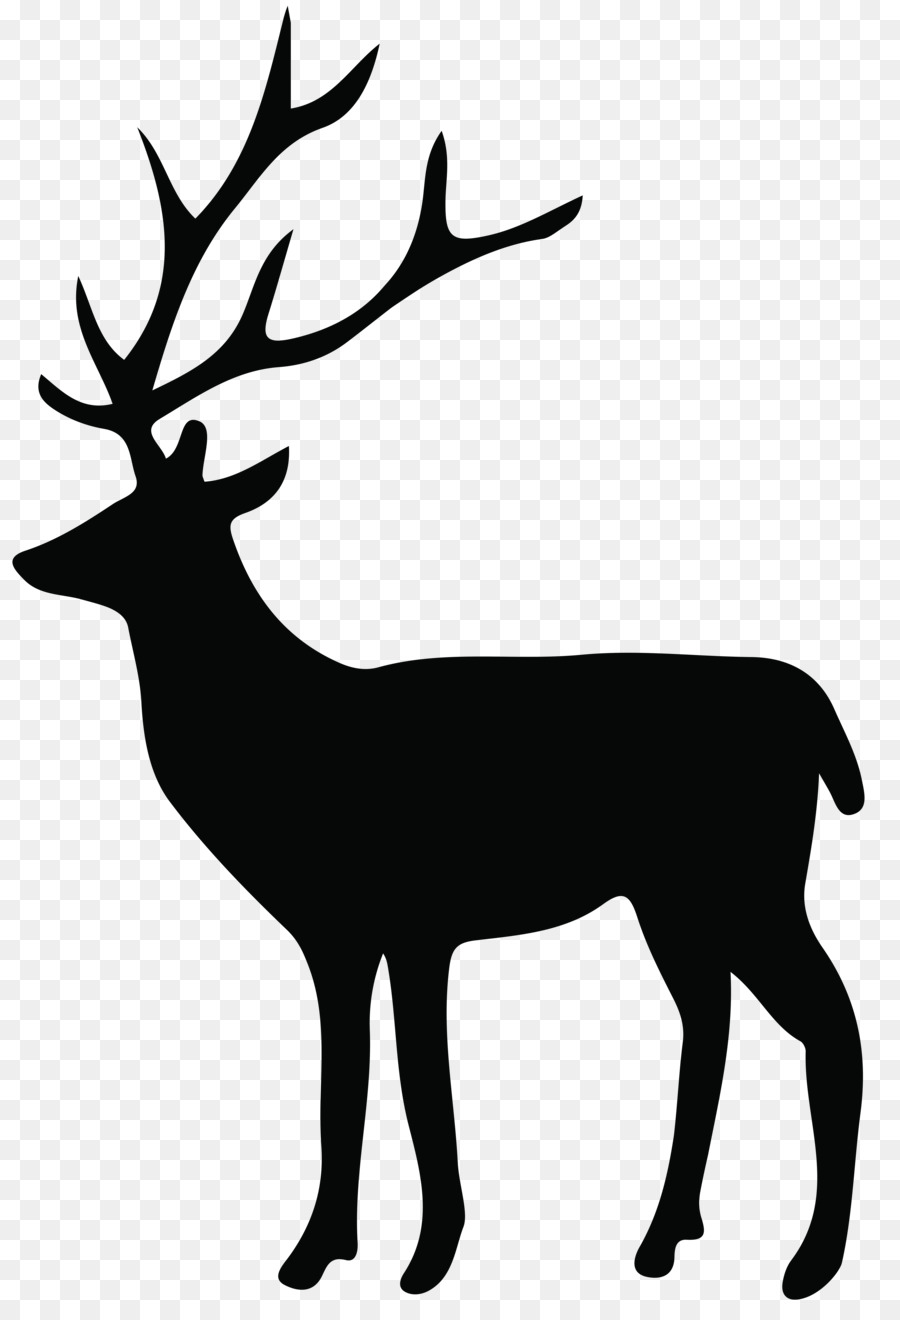 White-tailed deer Reindeer Whitetail Images: Up Close and Personal Clip art - deer png download - 5487*8000 - Free Transparent Deer png Download.